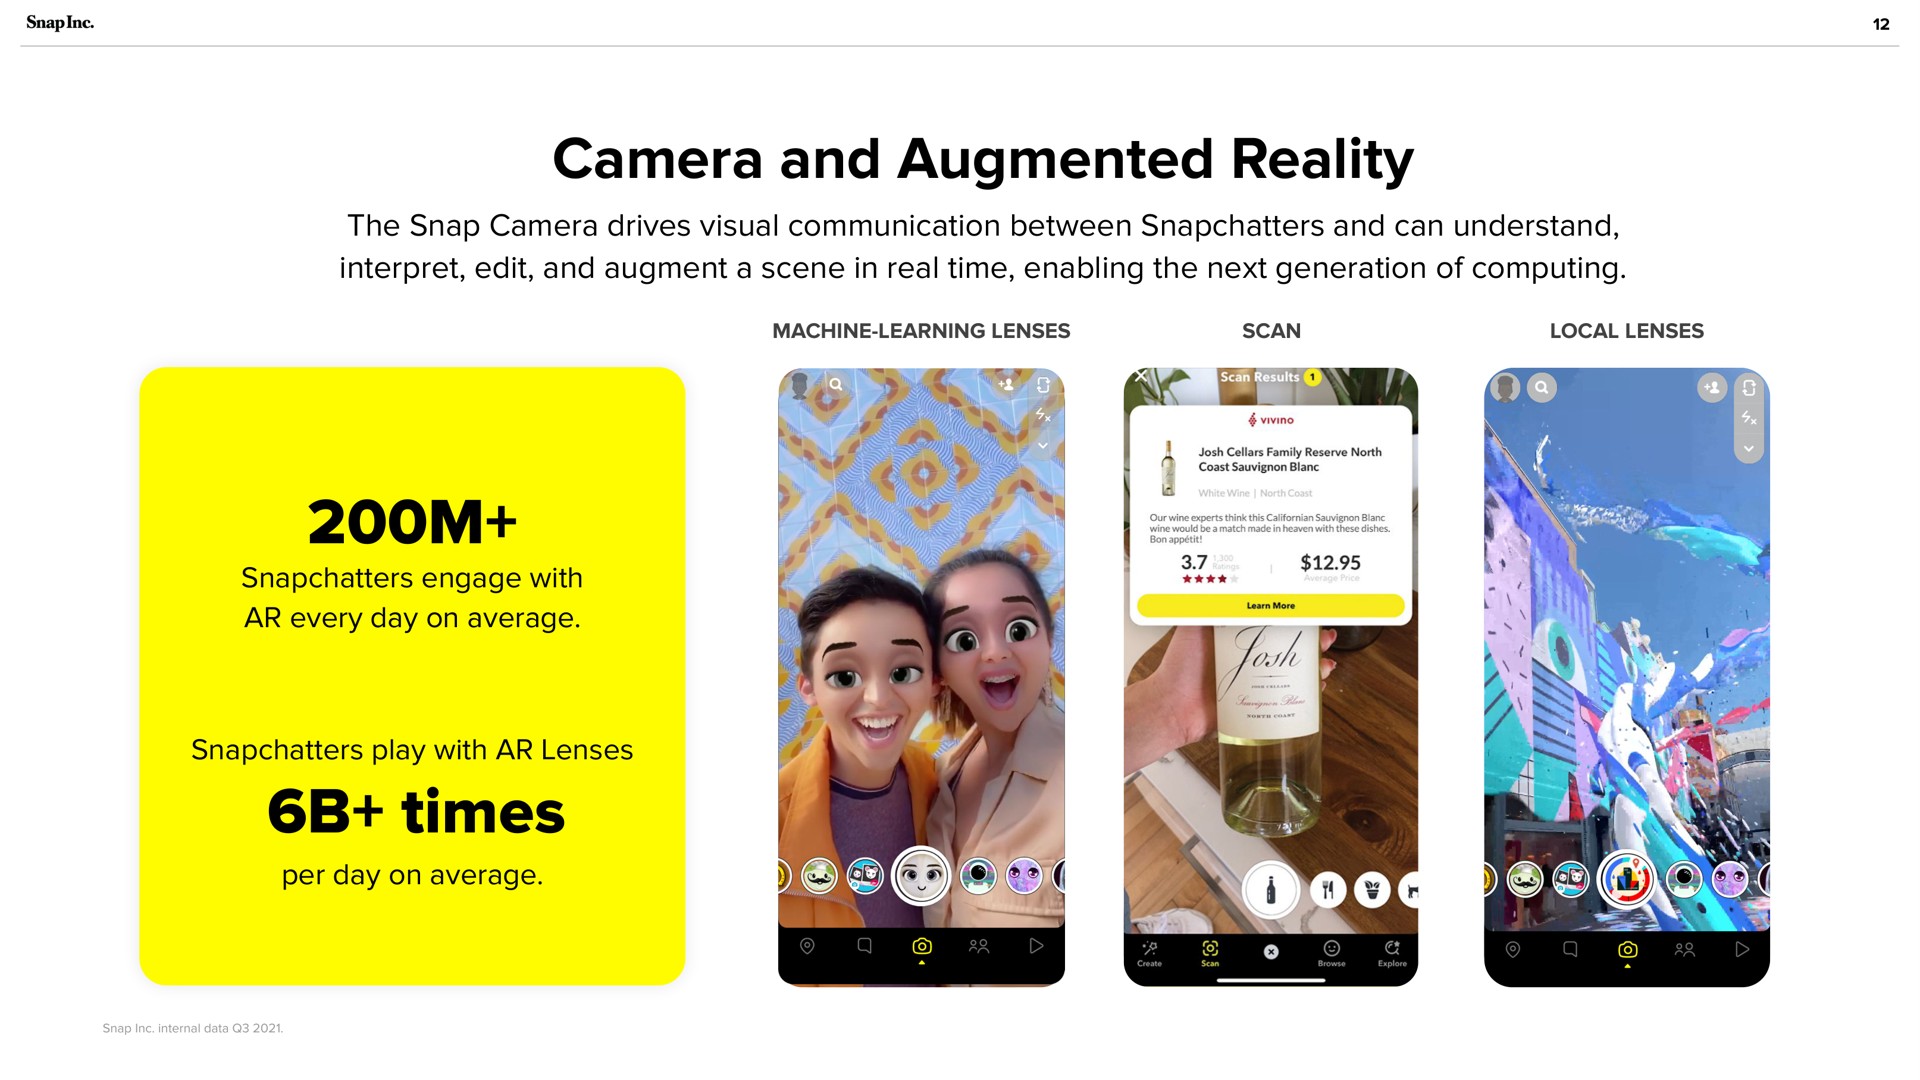 camera and augmented reality times the snap drives visual communication between can understand interpret edit augment a scene in real time enabling the next generation of computing per day on average play with lenses | Snap Inc